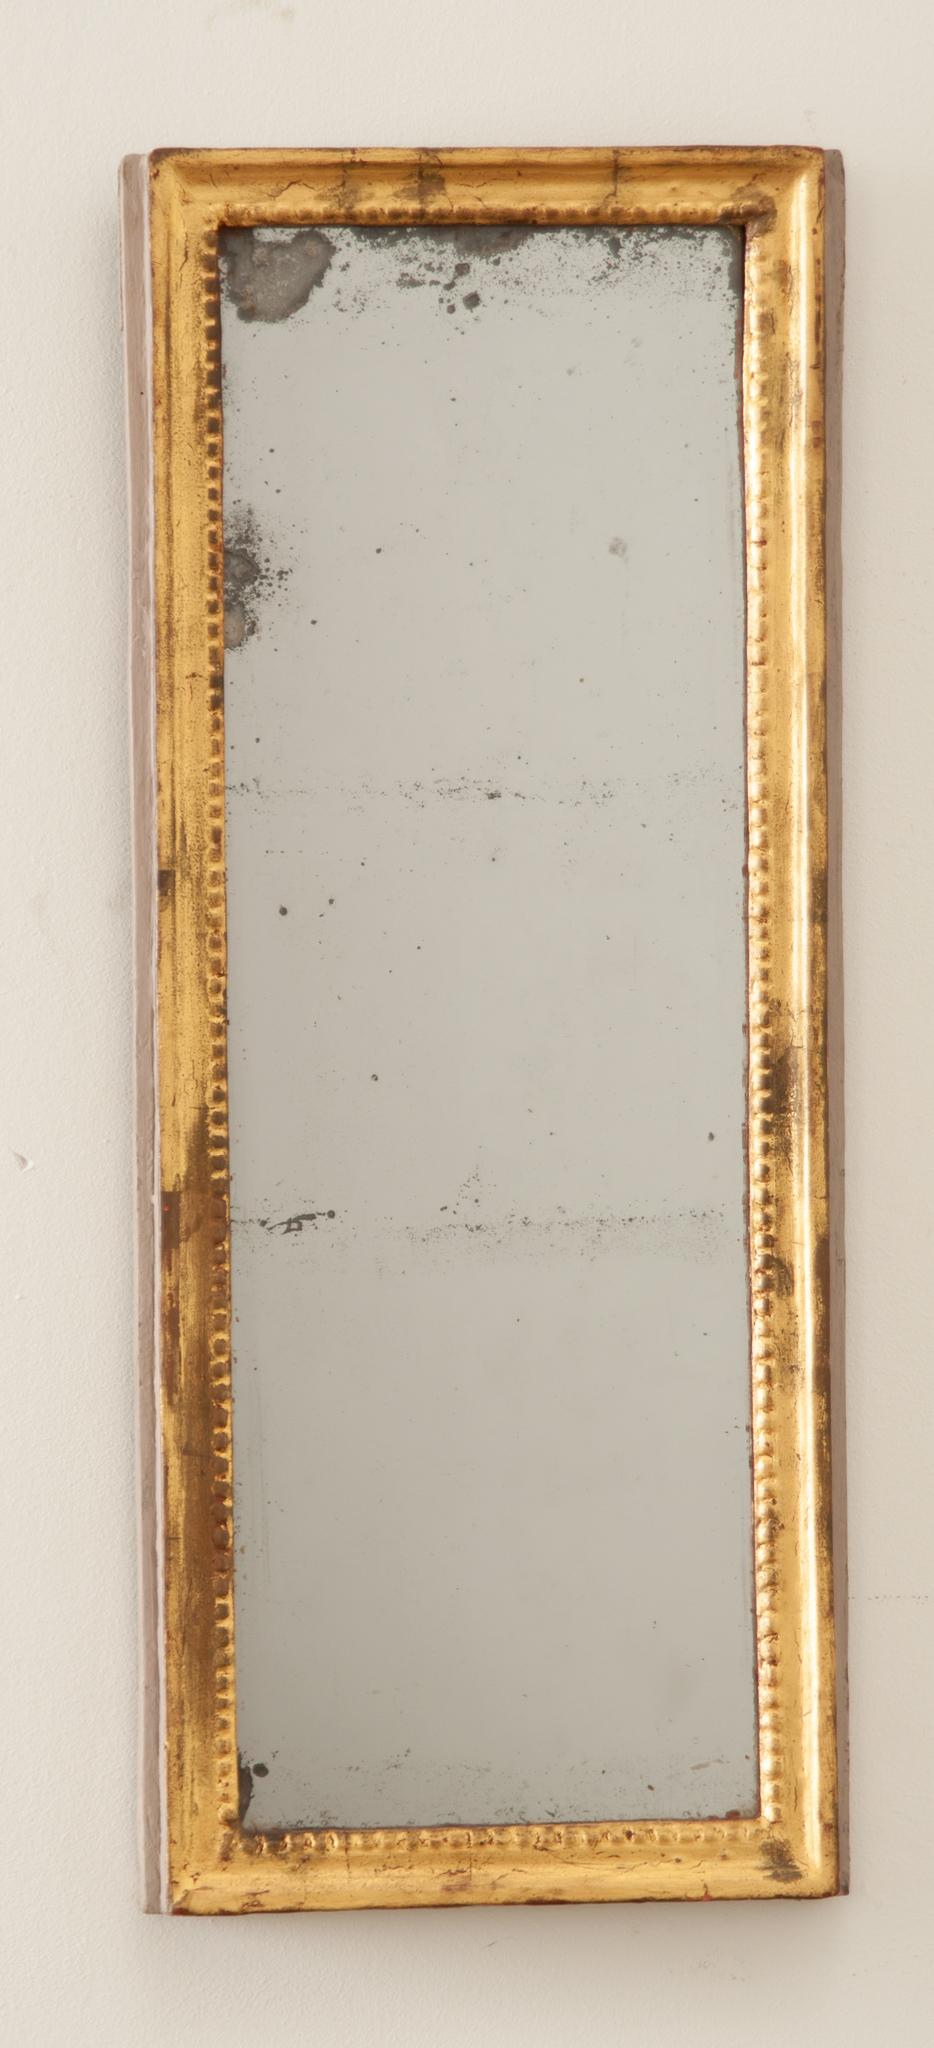 A lovely petite 19th century French mirror in a well patinated gold gilt frame. Handcrafted in France in the 1800s the worn gold gilt and underlying gesso coming through on the hand-carved frame create a truly wonderful patina and textured look. The